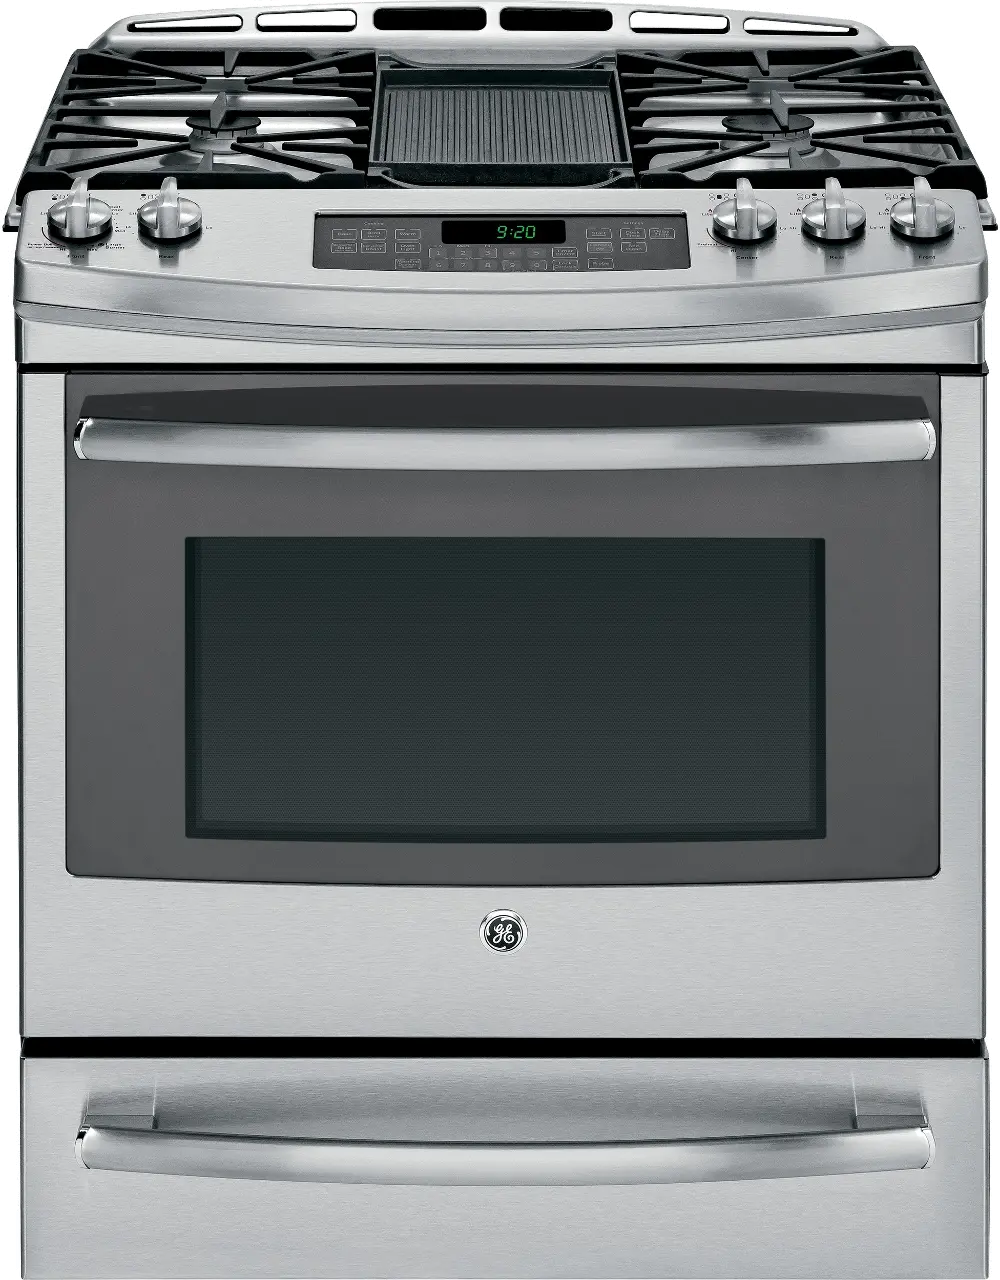 PGS920SEFSS GE Profile Series 5.6 cu. ft. Gas Convection Slide-in Range - Stainless Steel-1